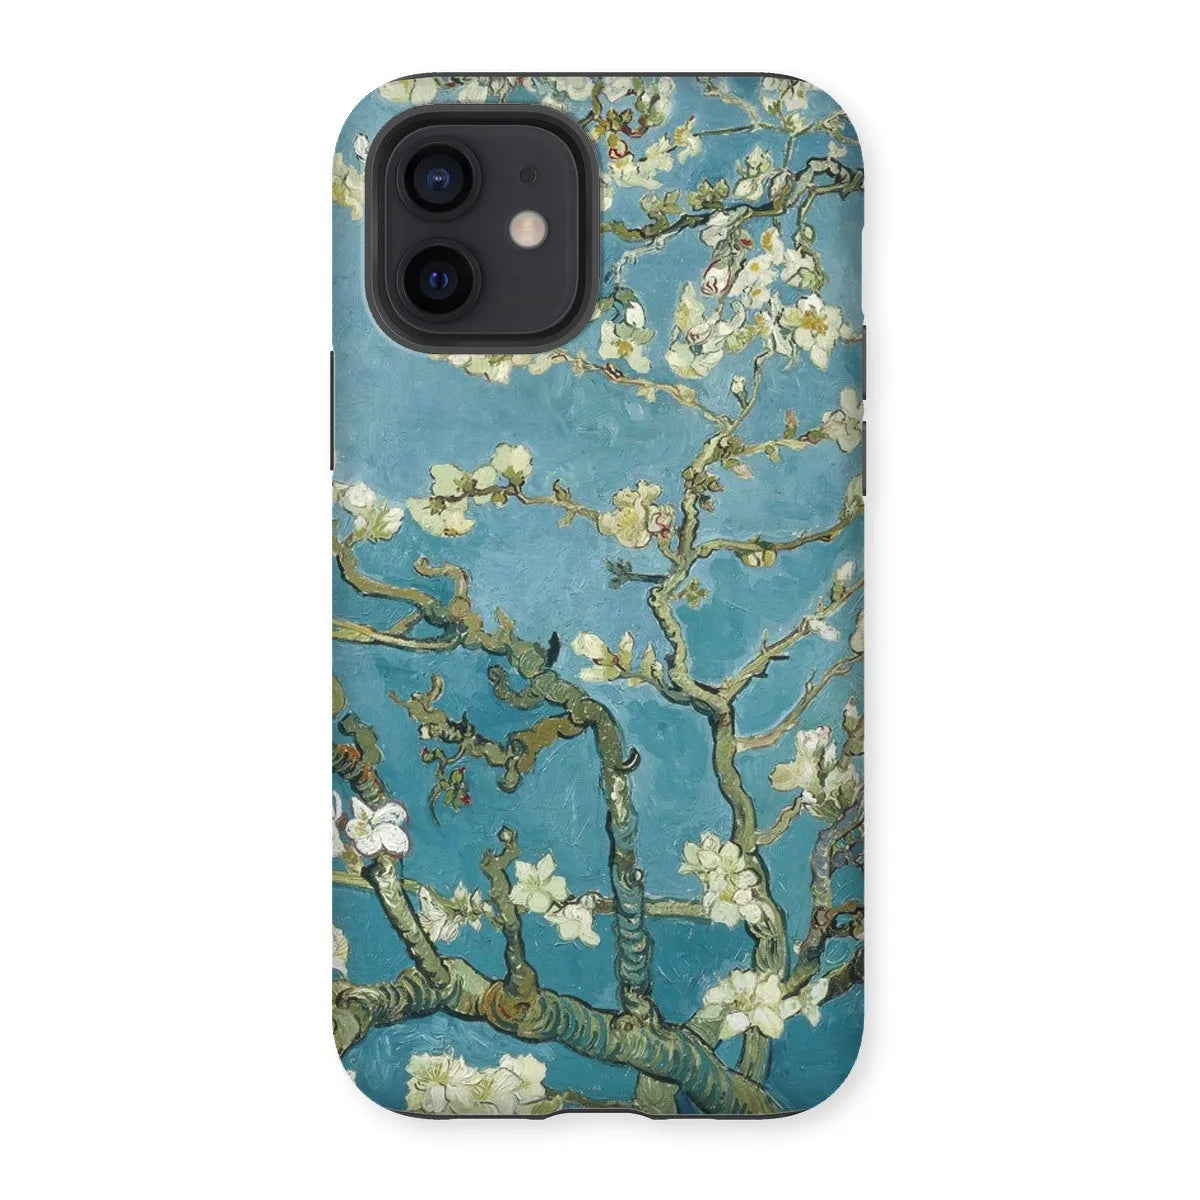 Almond Blossom - Vincent Van Gogh Aesthetic Phone Case - Iphone 12 / Matte - Mobile Phone Cases - Aesthetic Art